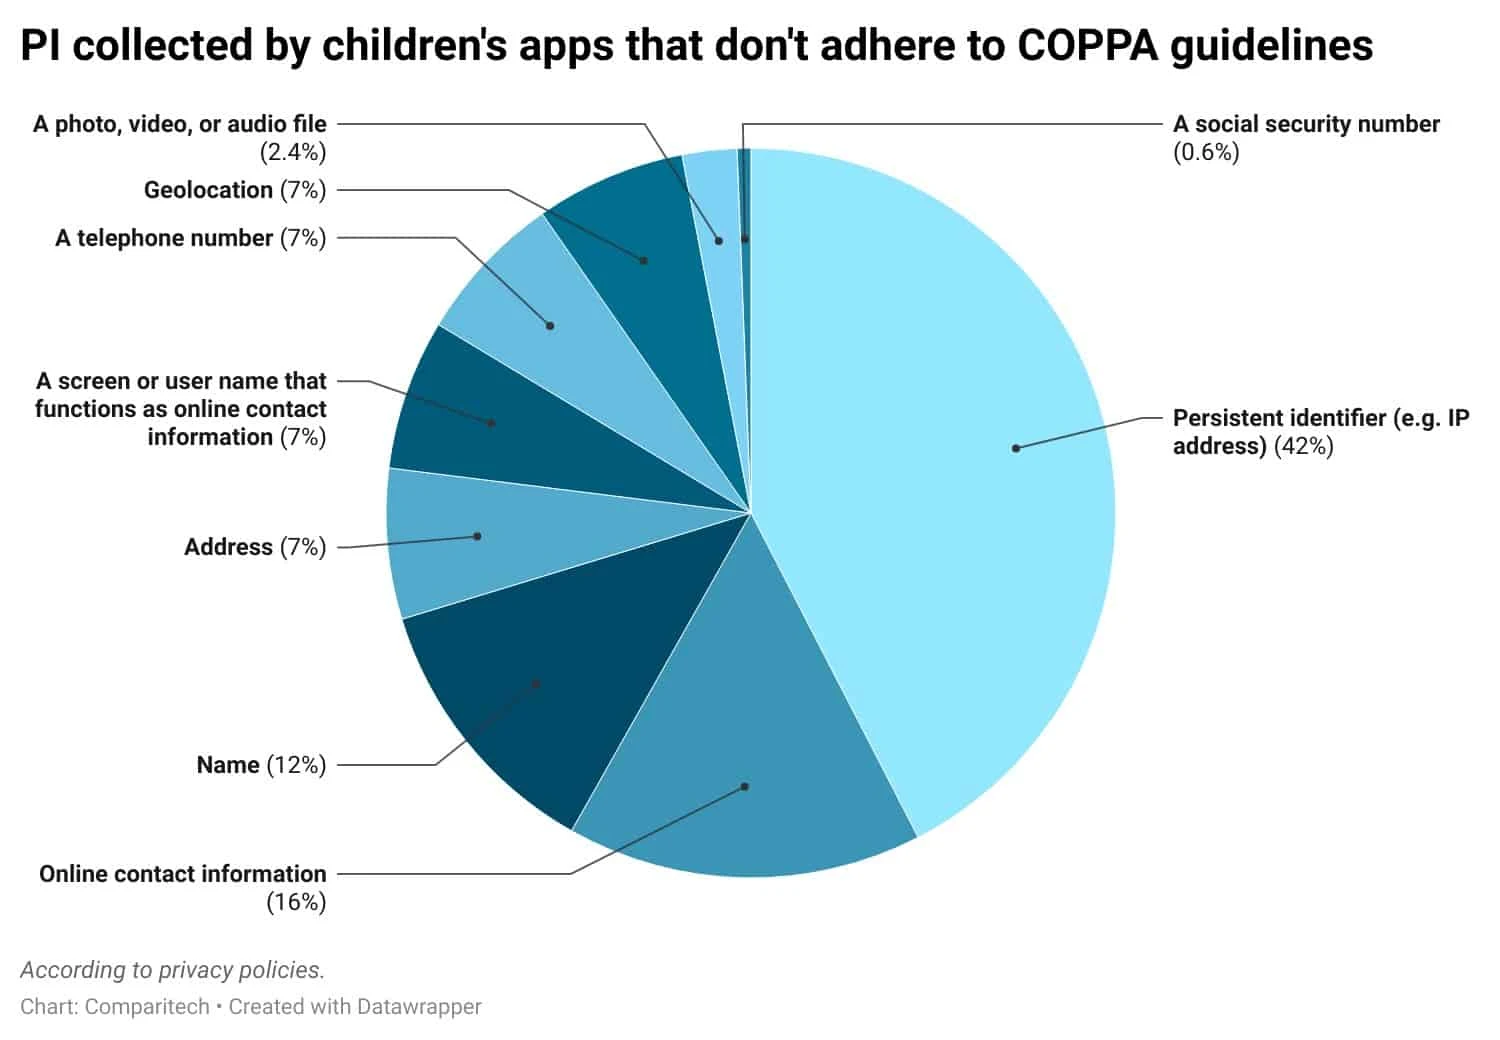 1 in 5 children’s Google Play Apps breach Children’s Online Privacy Protection Act rules